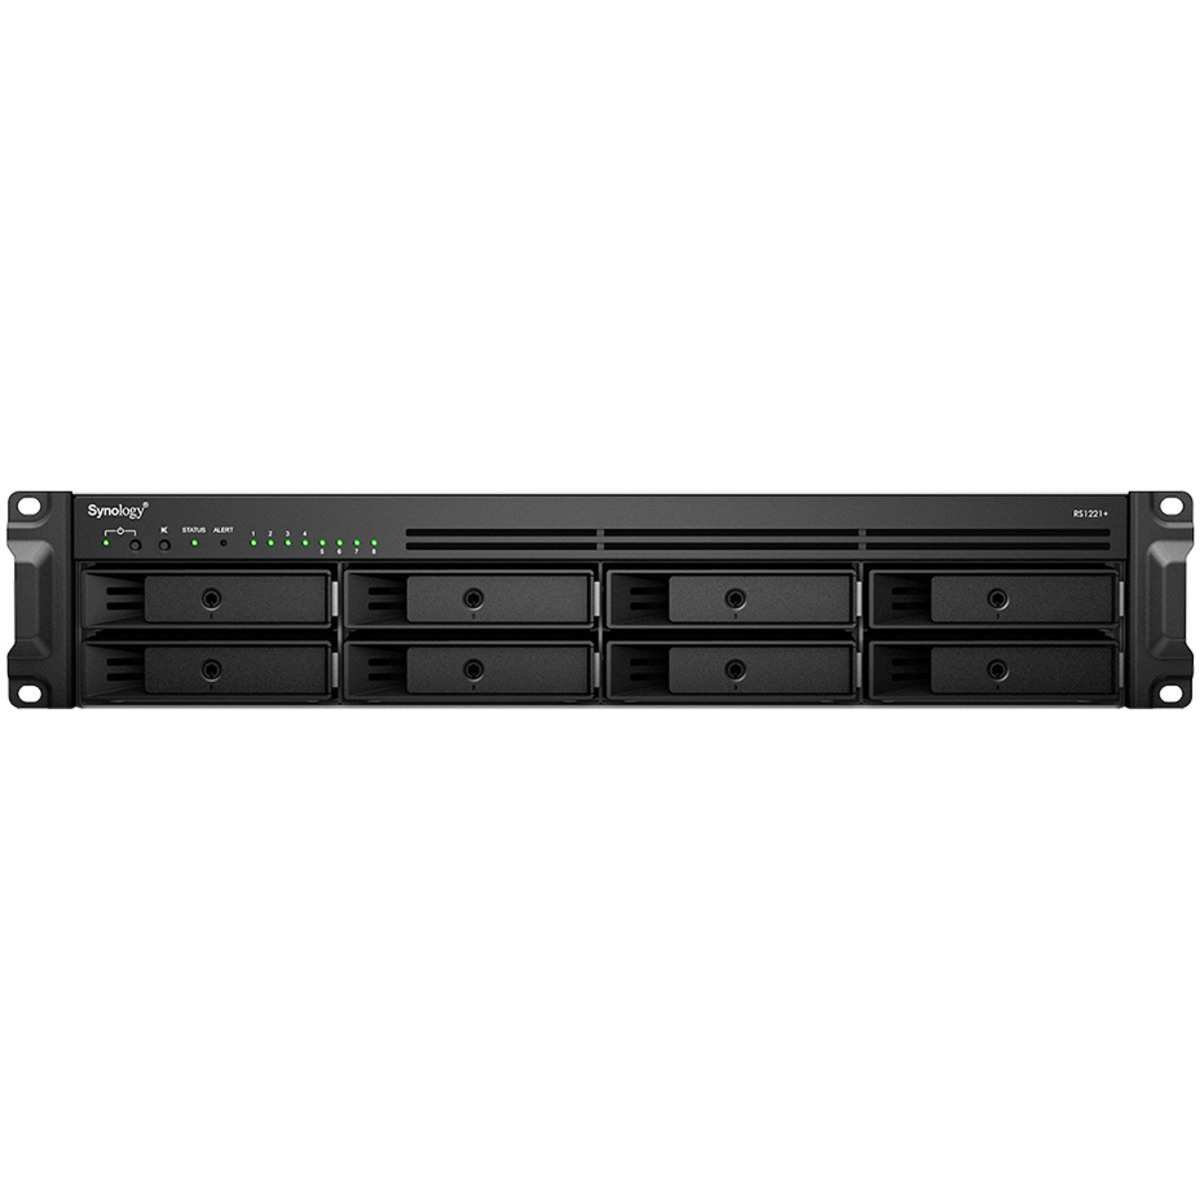 Synology RackStation RS1221+ 80tb 8-Bay RackMount Multimedia / Power User / Business NAS - Network Attached Storage Device 4x20tb Western Digital Gold WD202KRYZ 3.5 7200rpm SATA 6Gb/s HDD ENTERPRISE Class Drives Installed - Burn-In Tested RackStation RS1221+